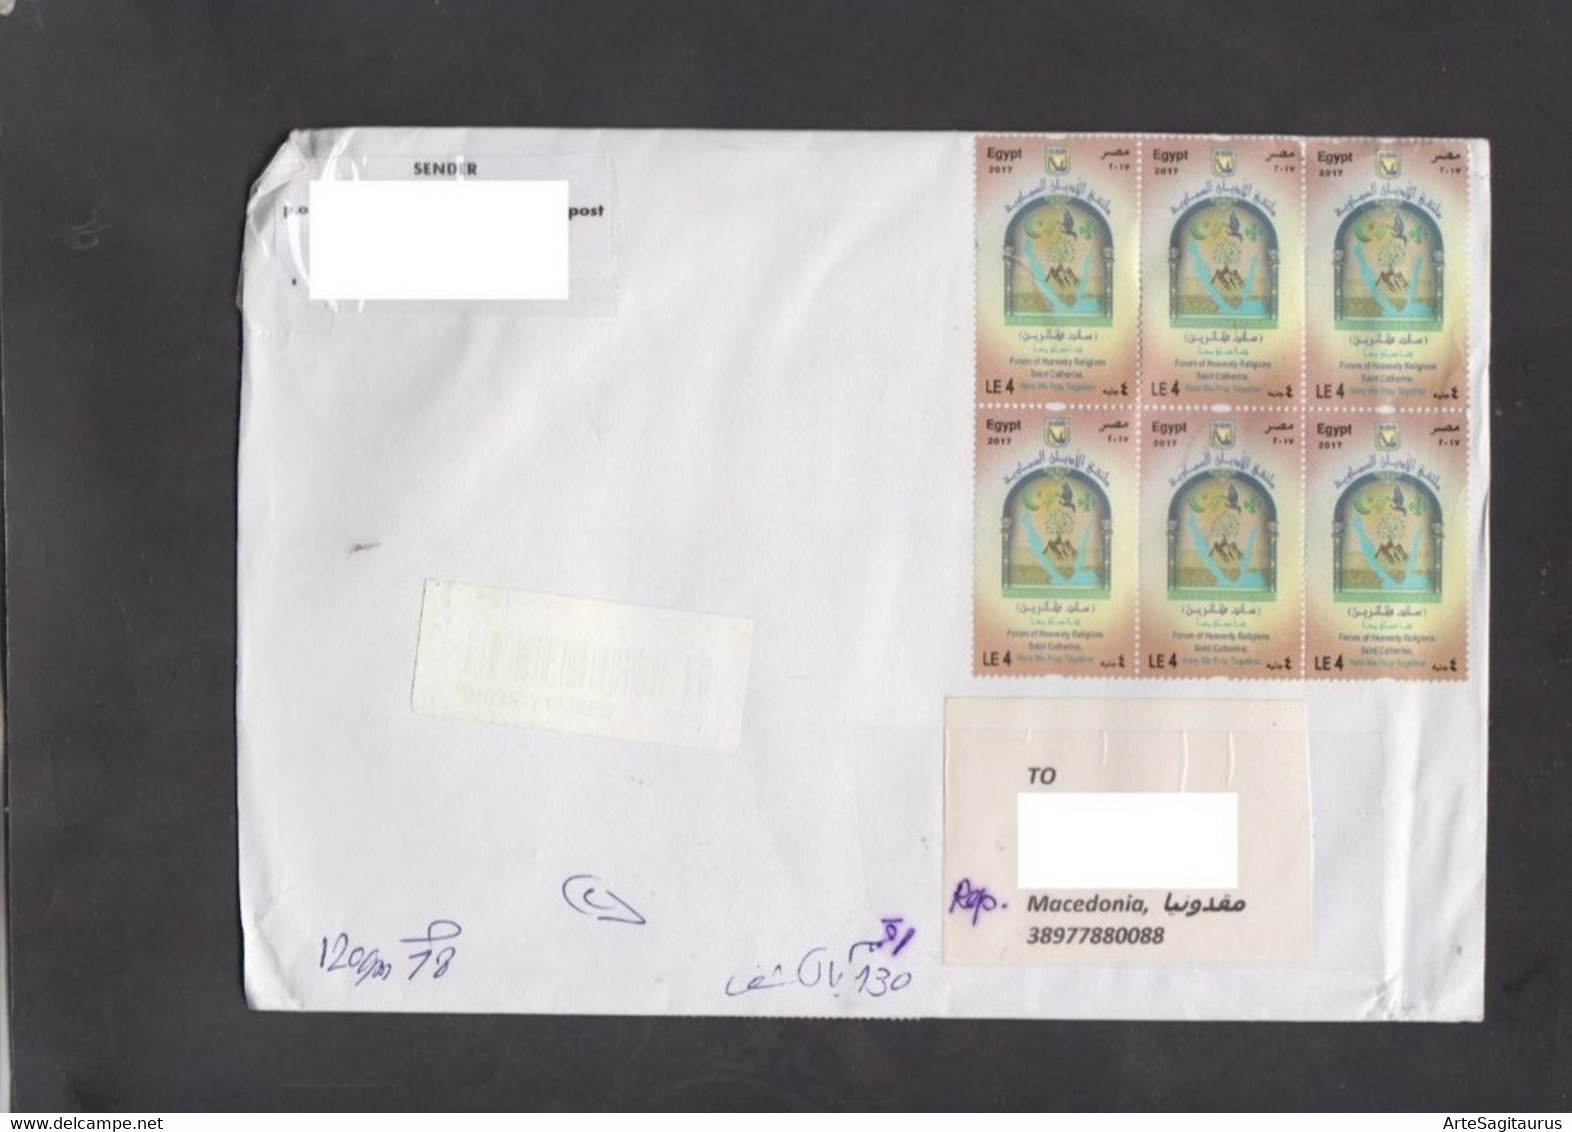 EGYPT, R-COVER, REPUBLIC OF MACEDONIA, Religion, Islam  (002) - Covers & Documents